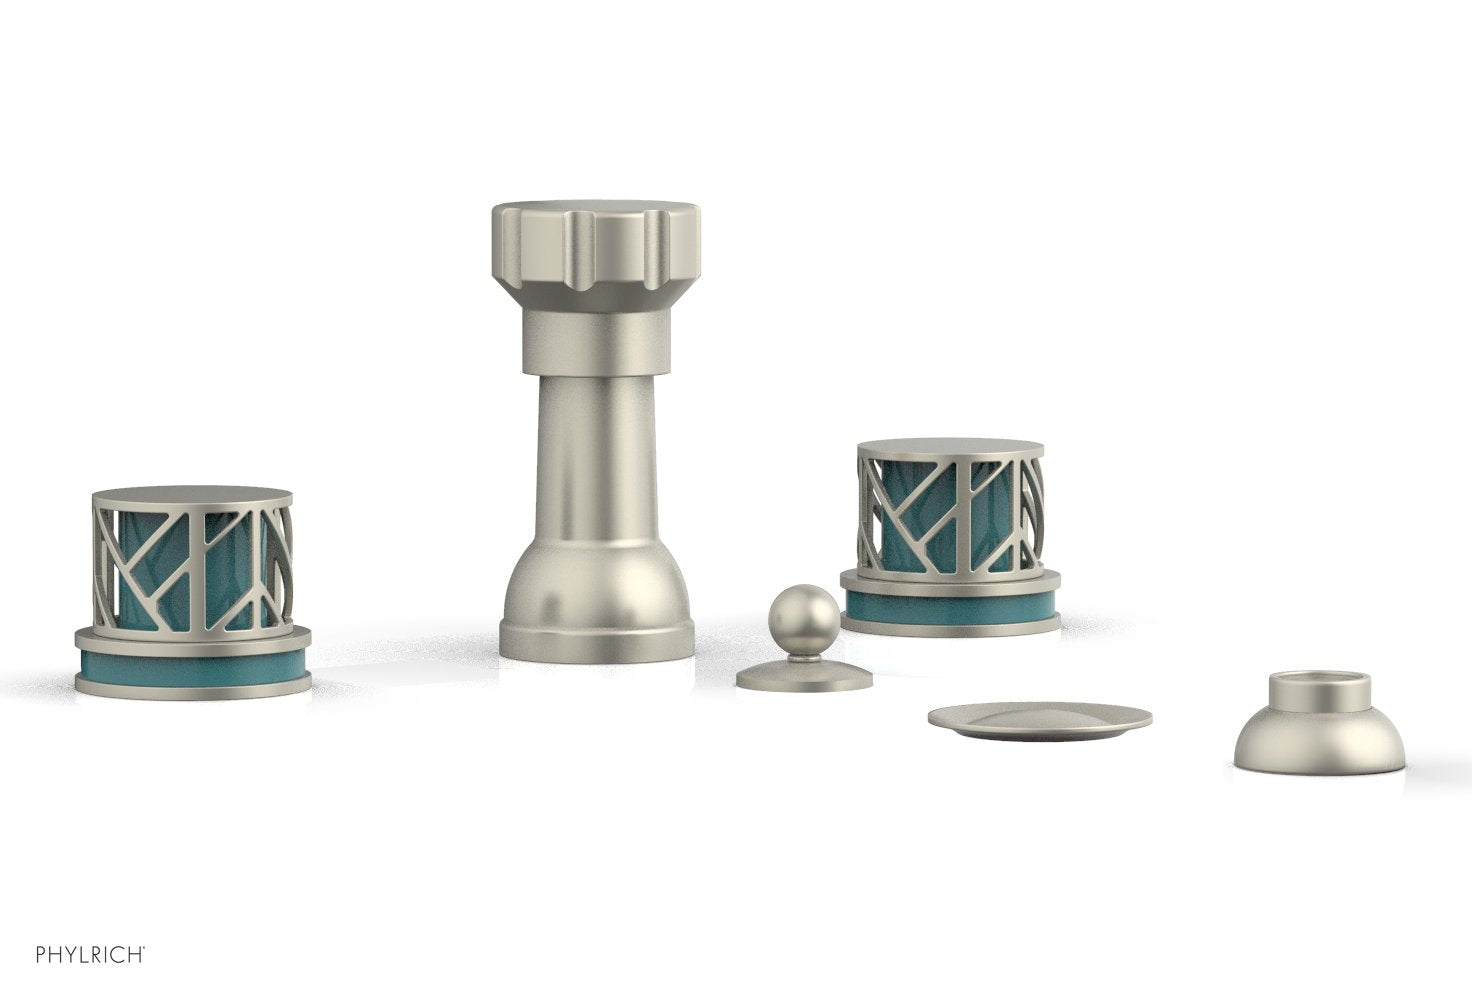 Phylrich JOLIE Four Hole Bidet Set - Round Handles with "Turquoise Accents"